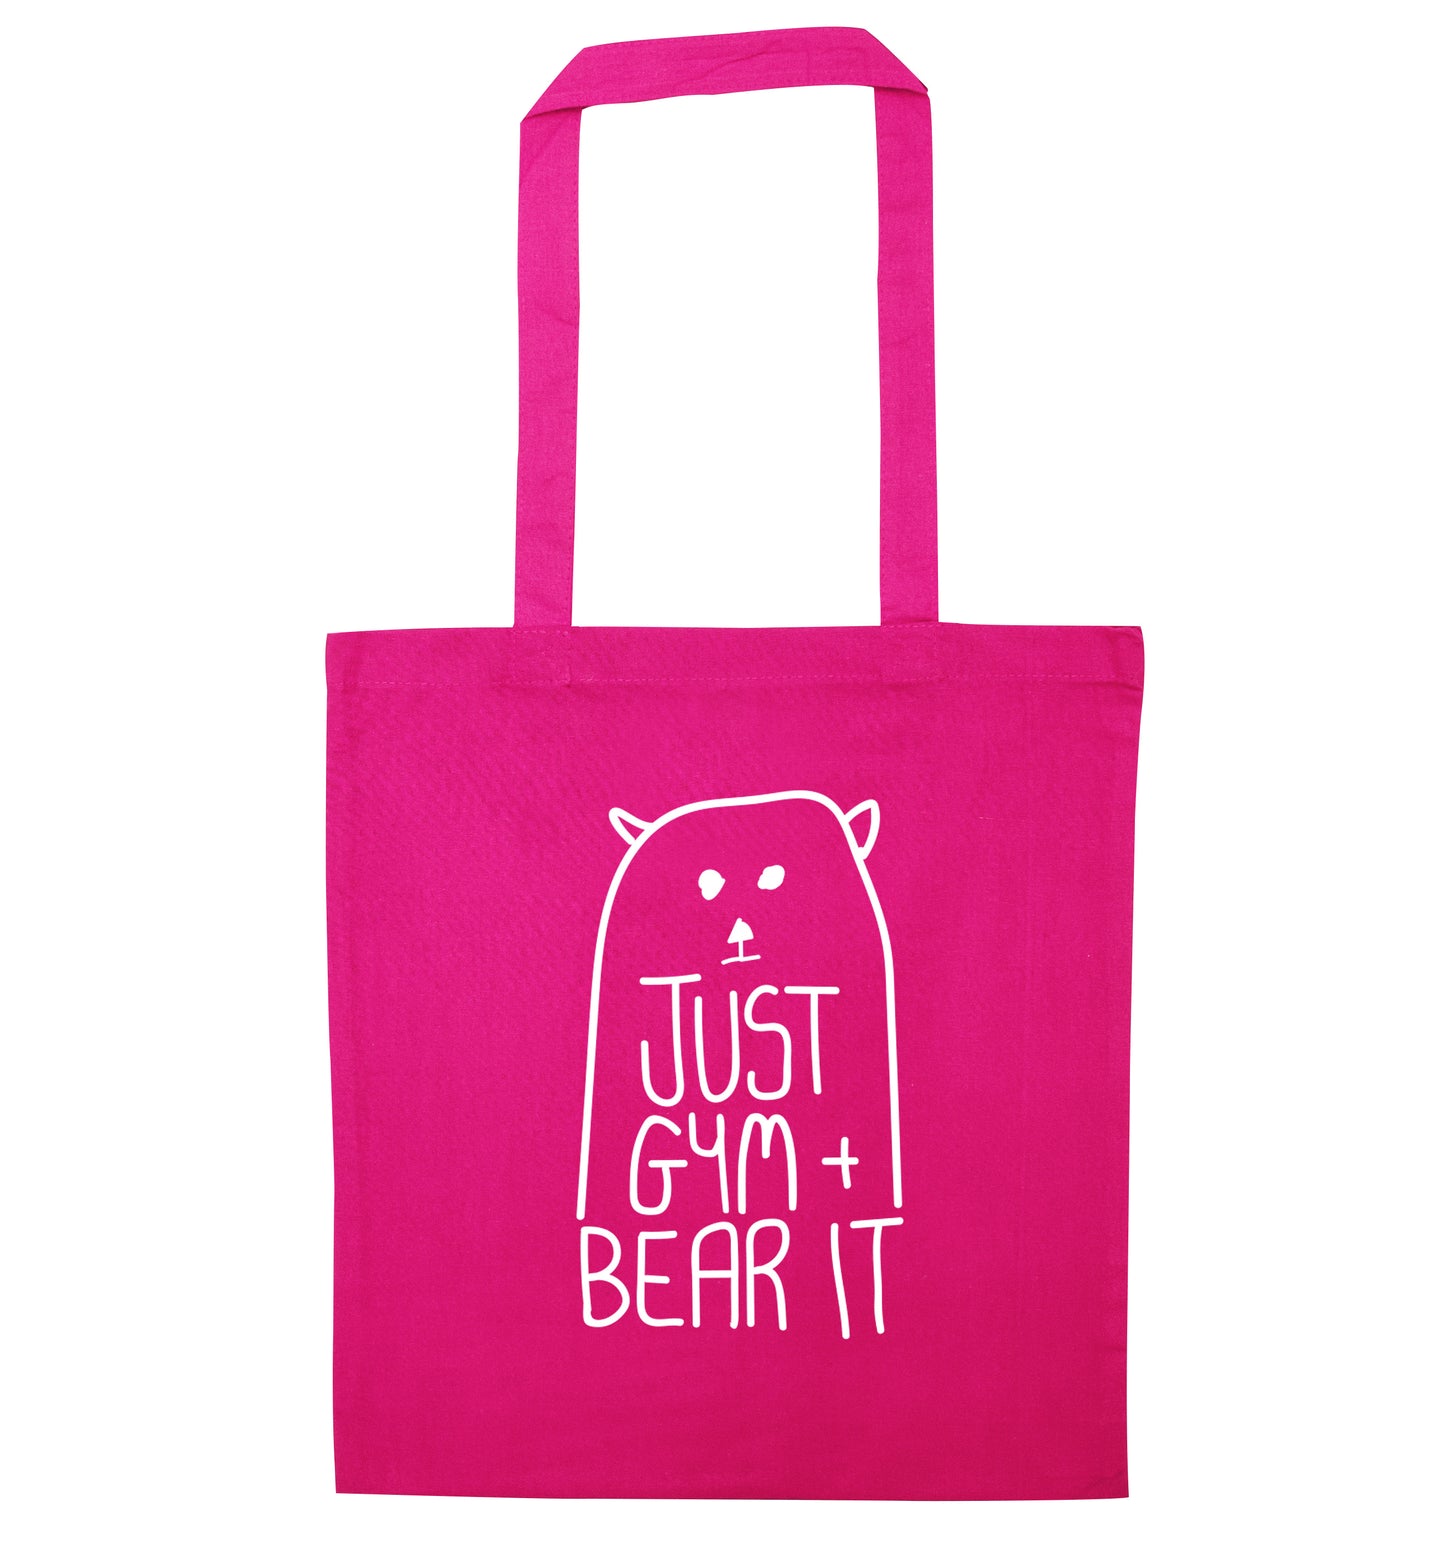 Just gym and bear it pink tote bag